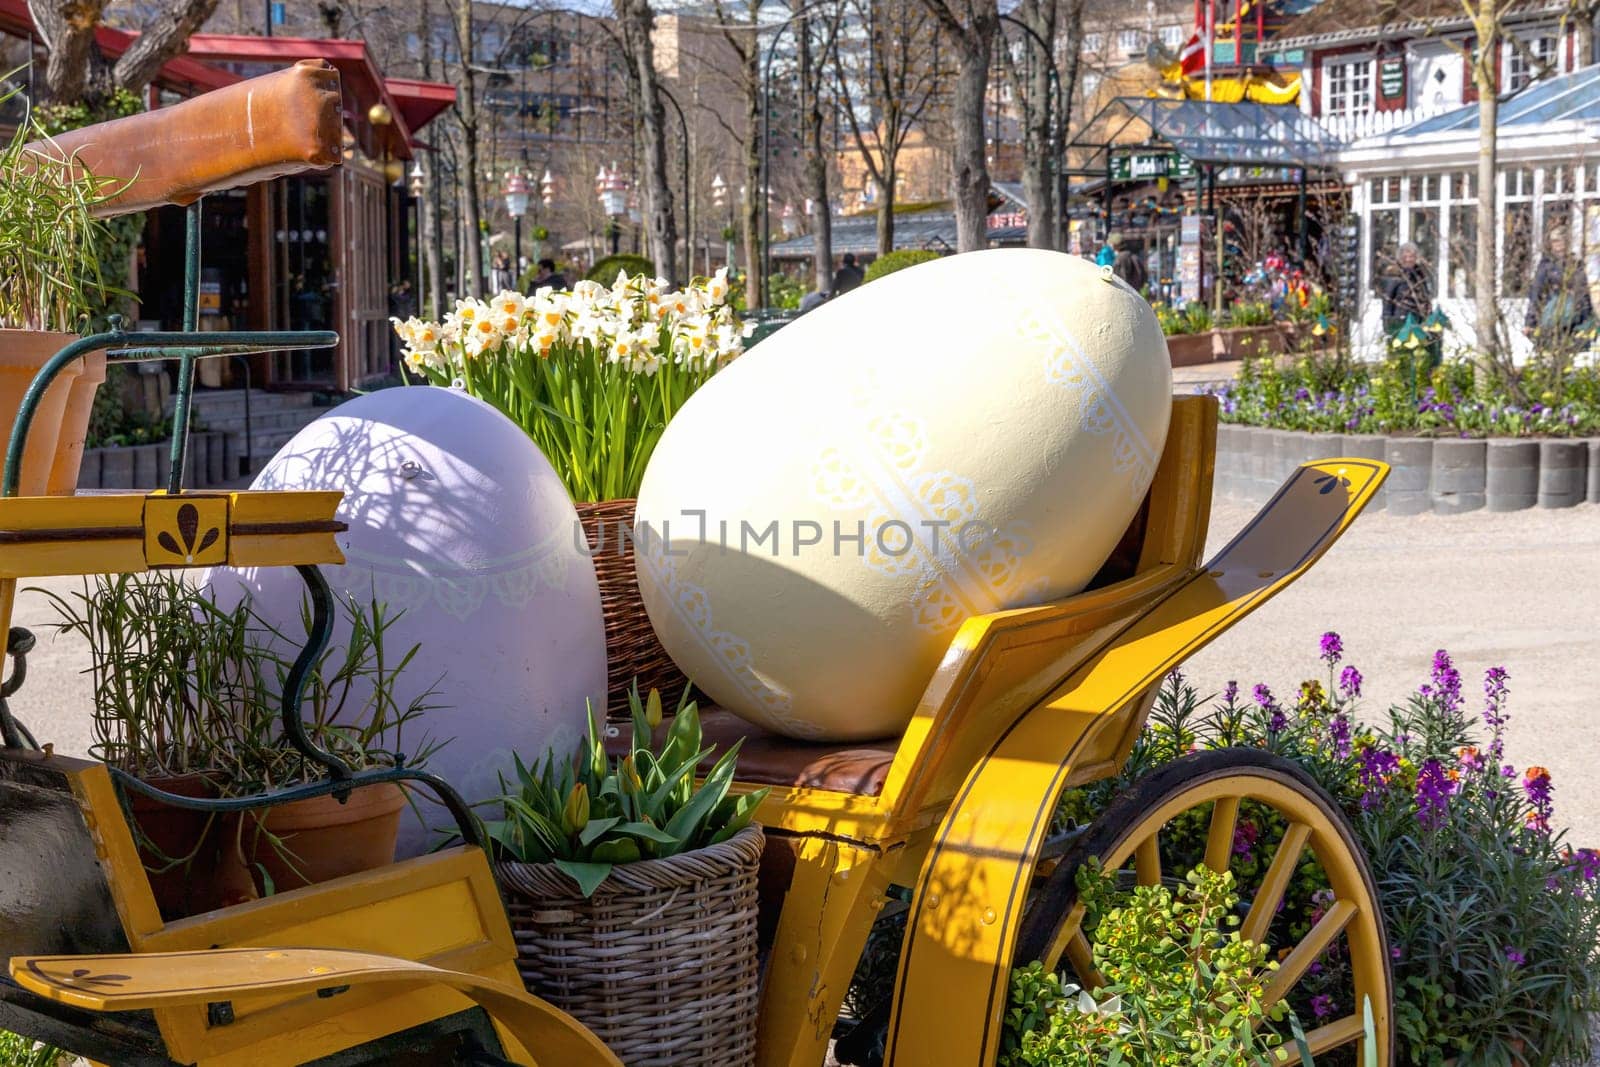 Easter decoration of a carriage with large decorative Easter eggs in a city park.